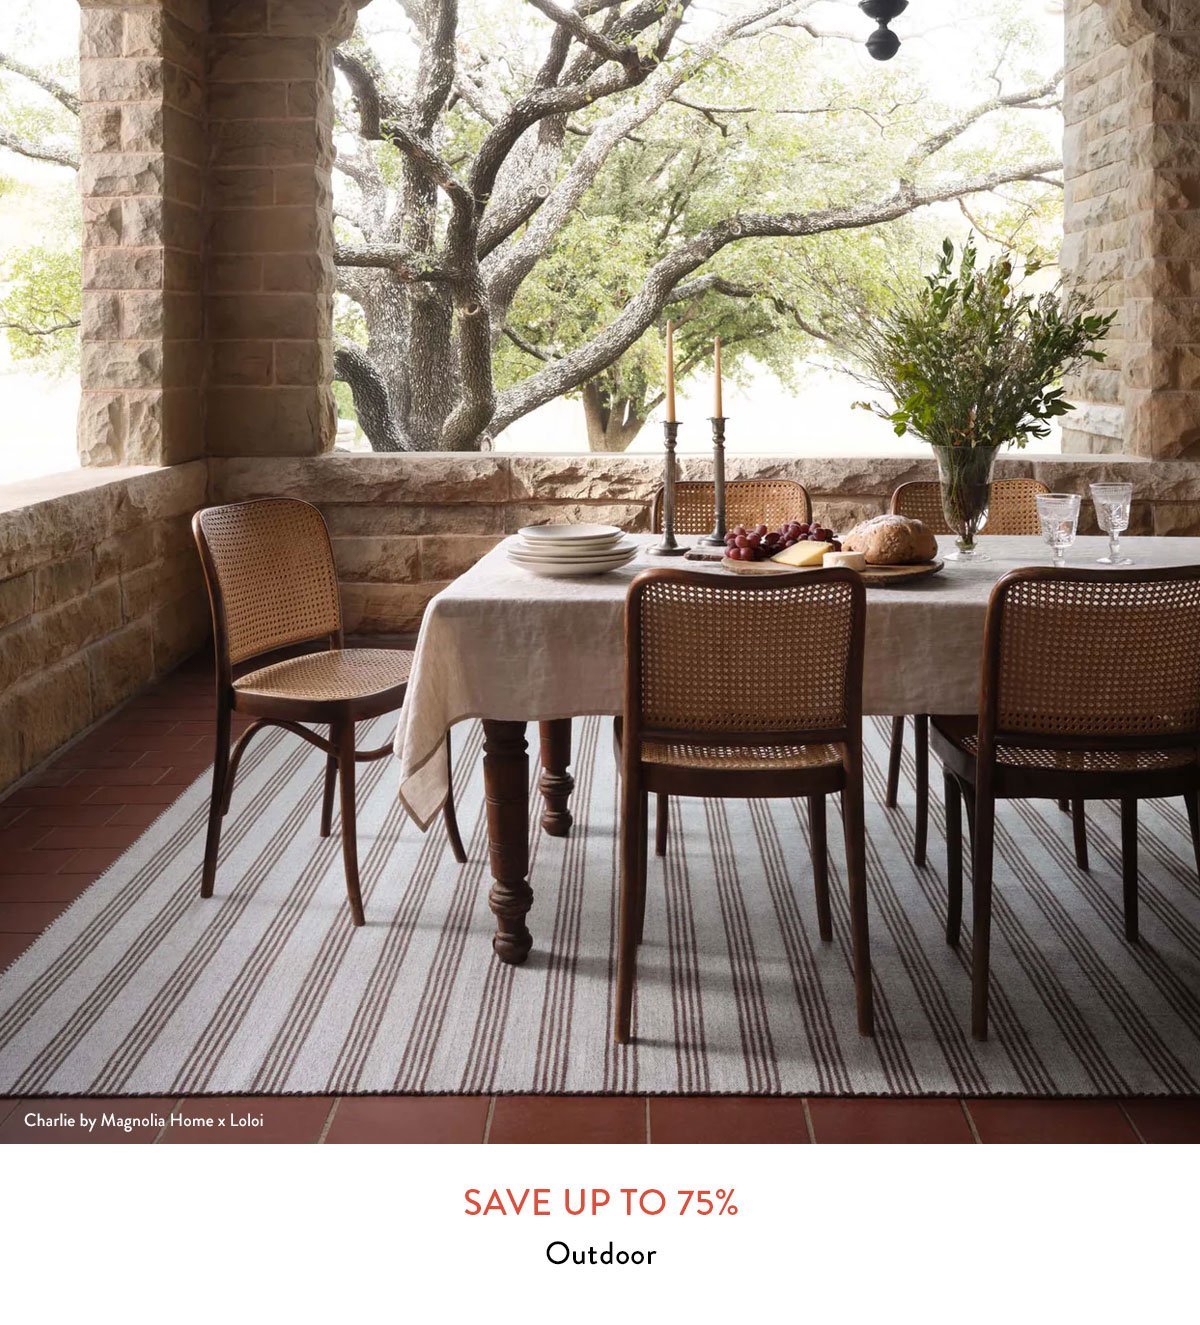 Outdoor - Save up to 75%